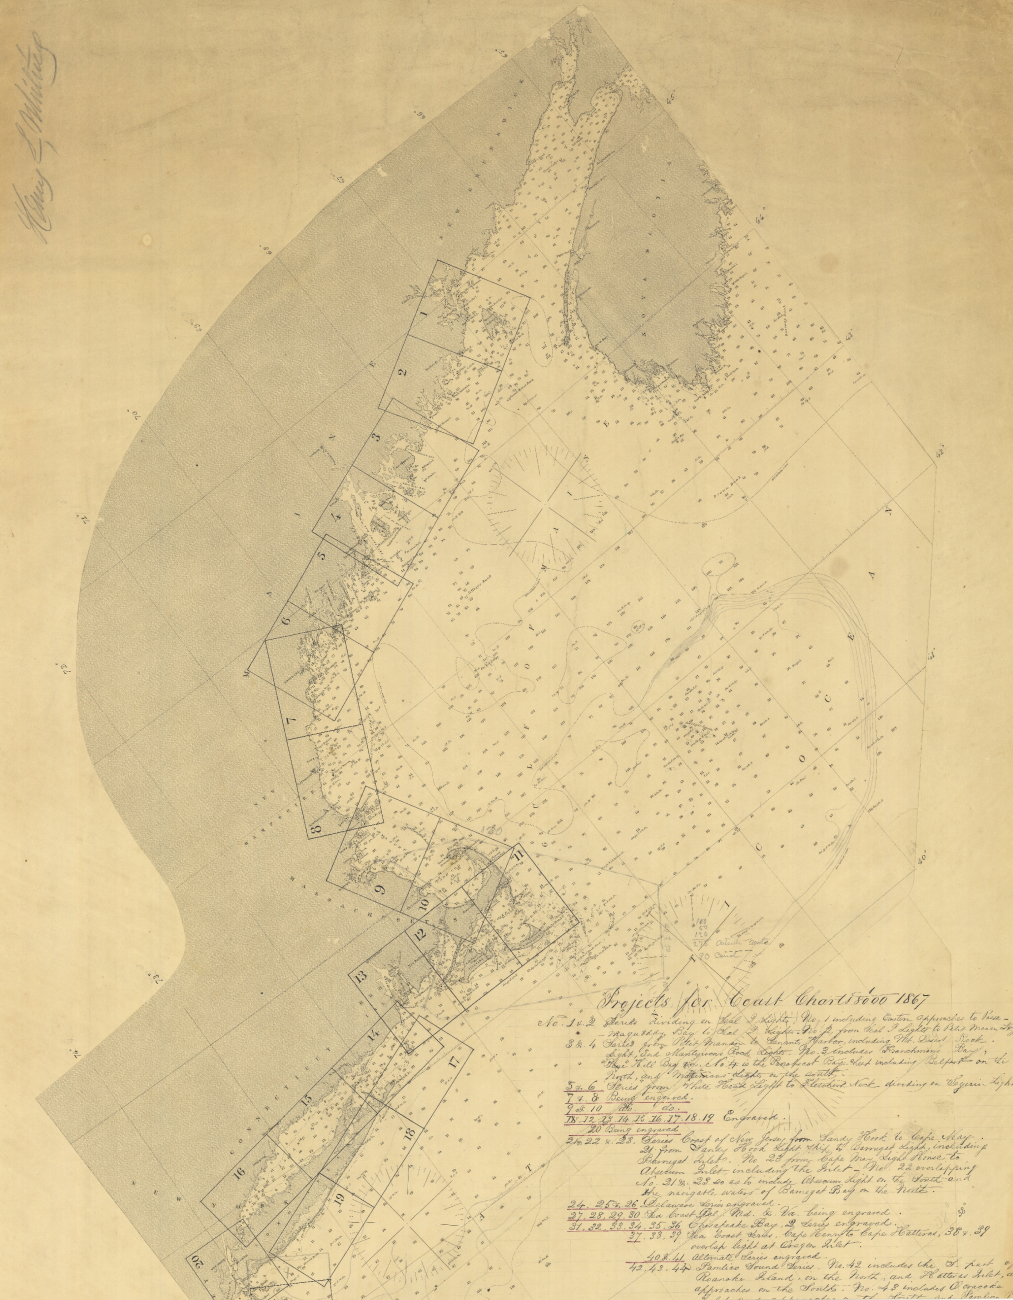 Map showing the Projects for Coast Charts divided into sections